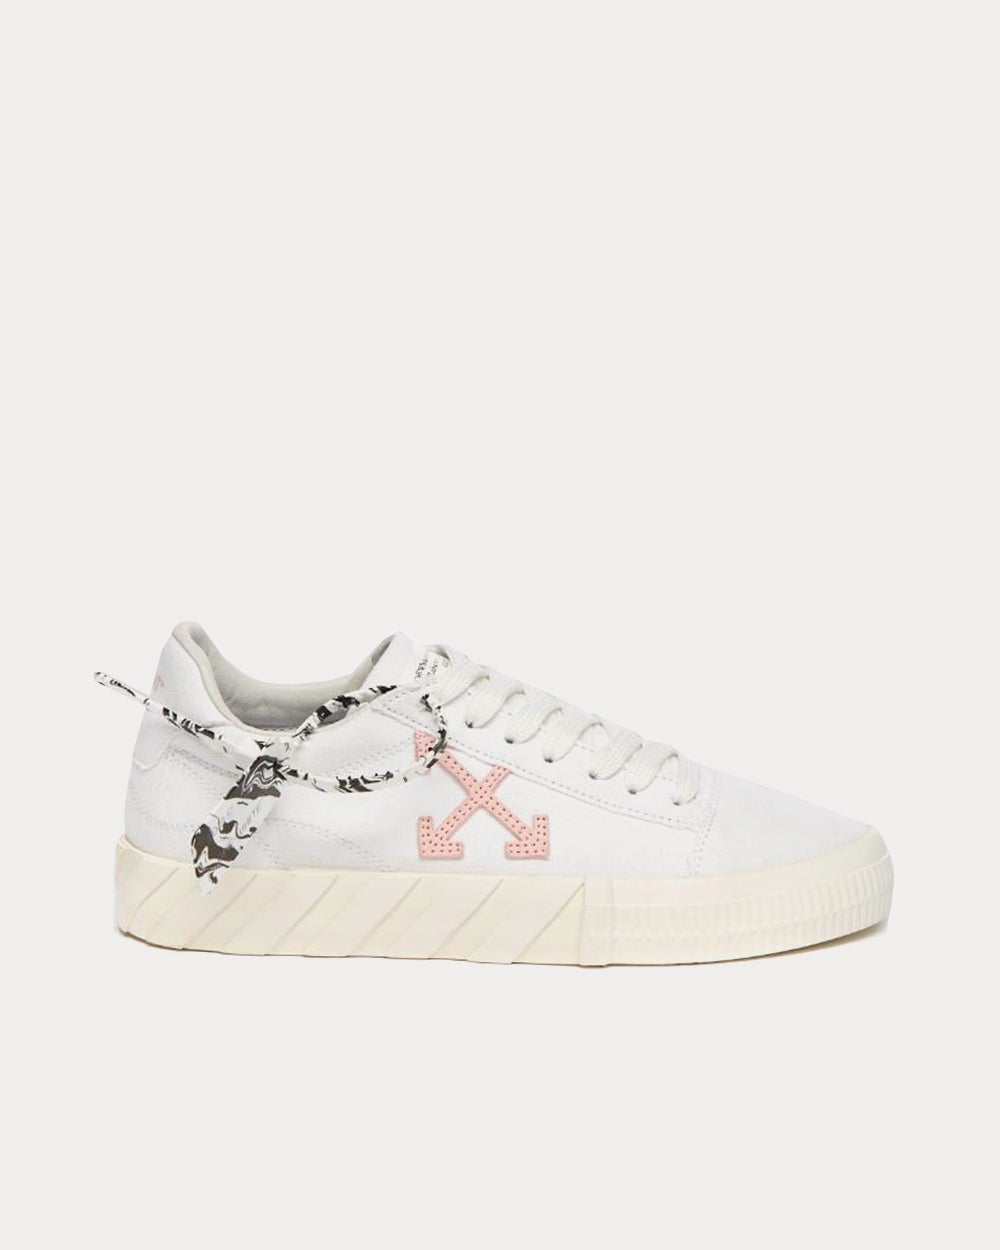 OFF-WHITE Vulc Low Canvas White Red Arrow Black